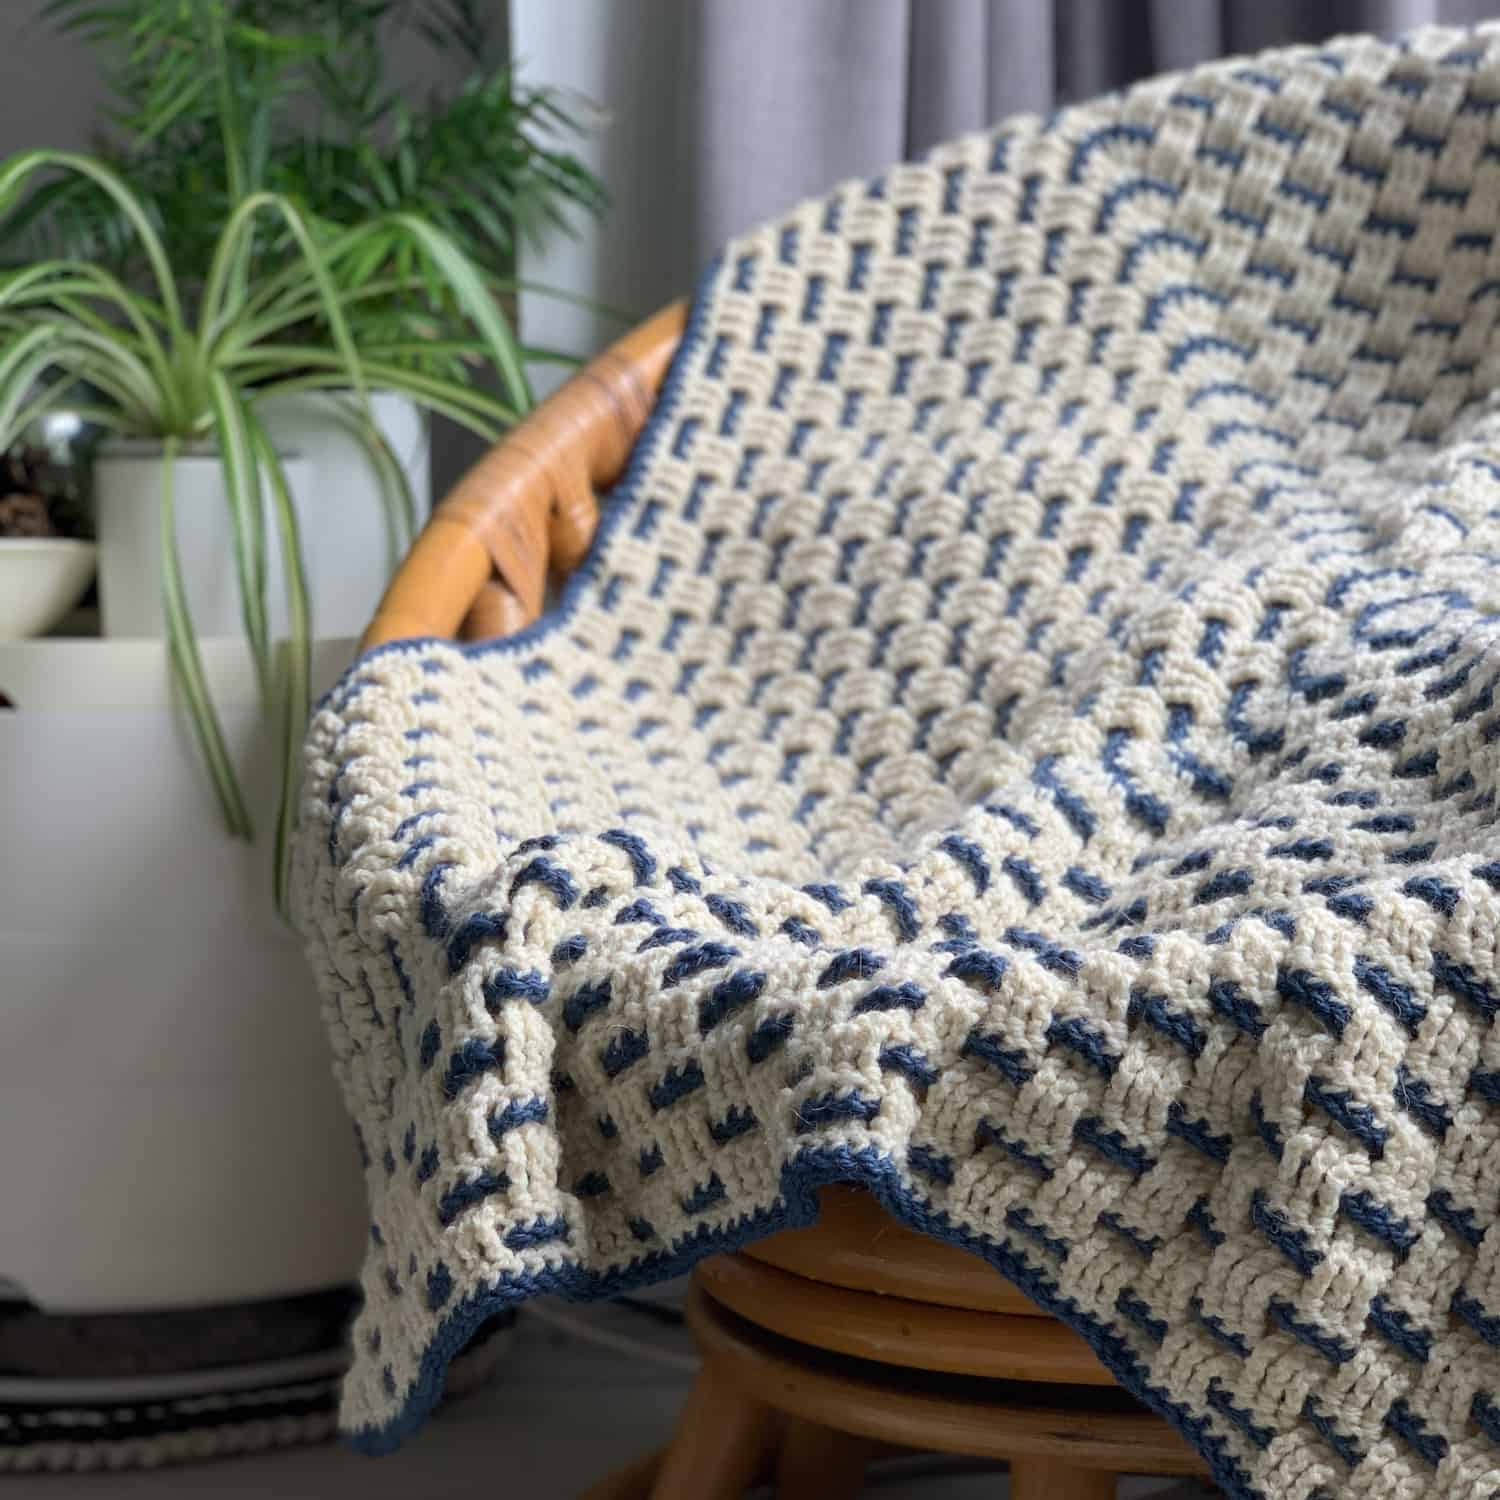 Crocheted & Woven Afghan Pattern